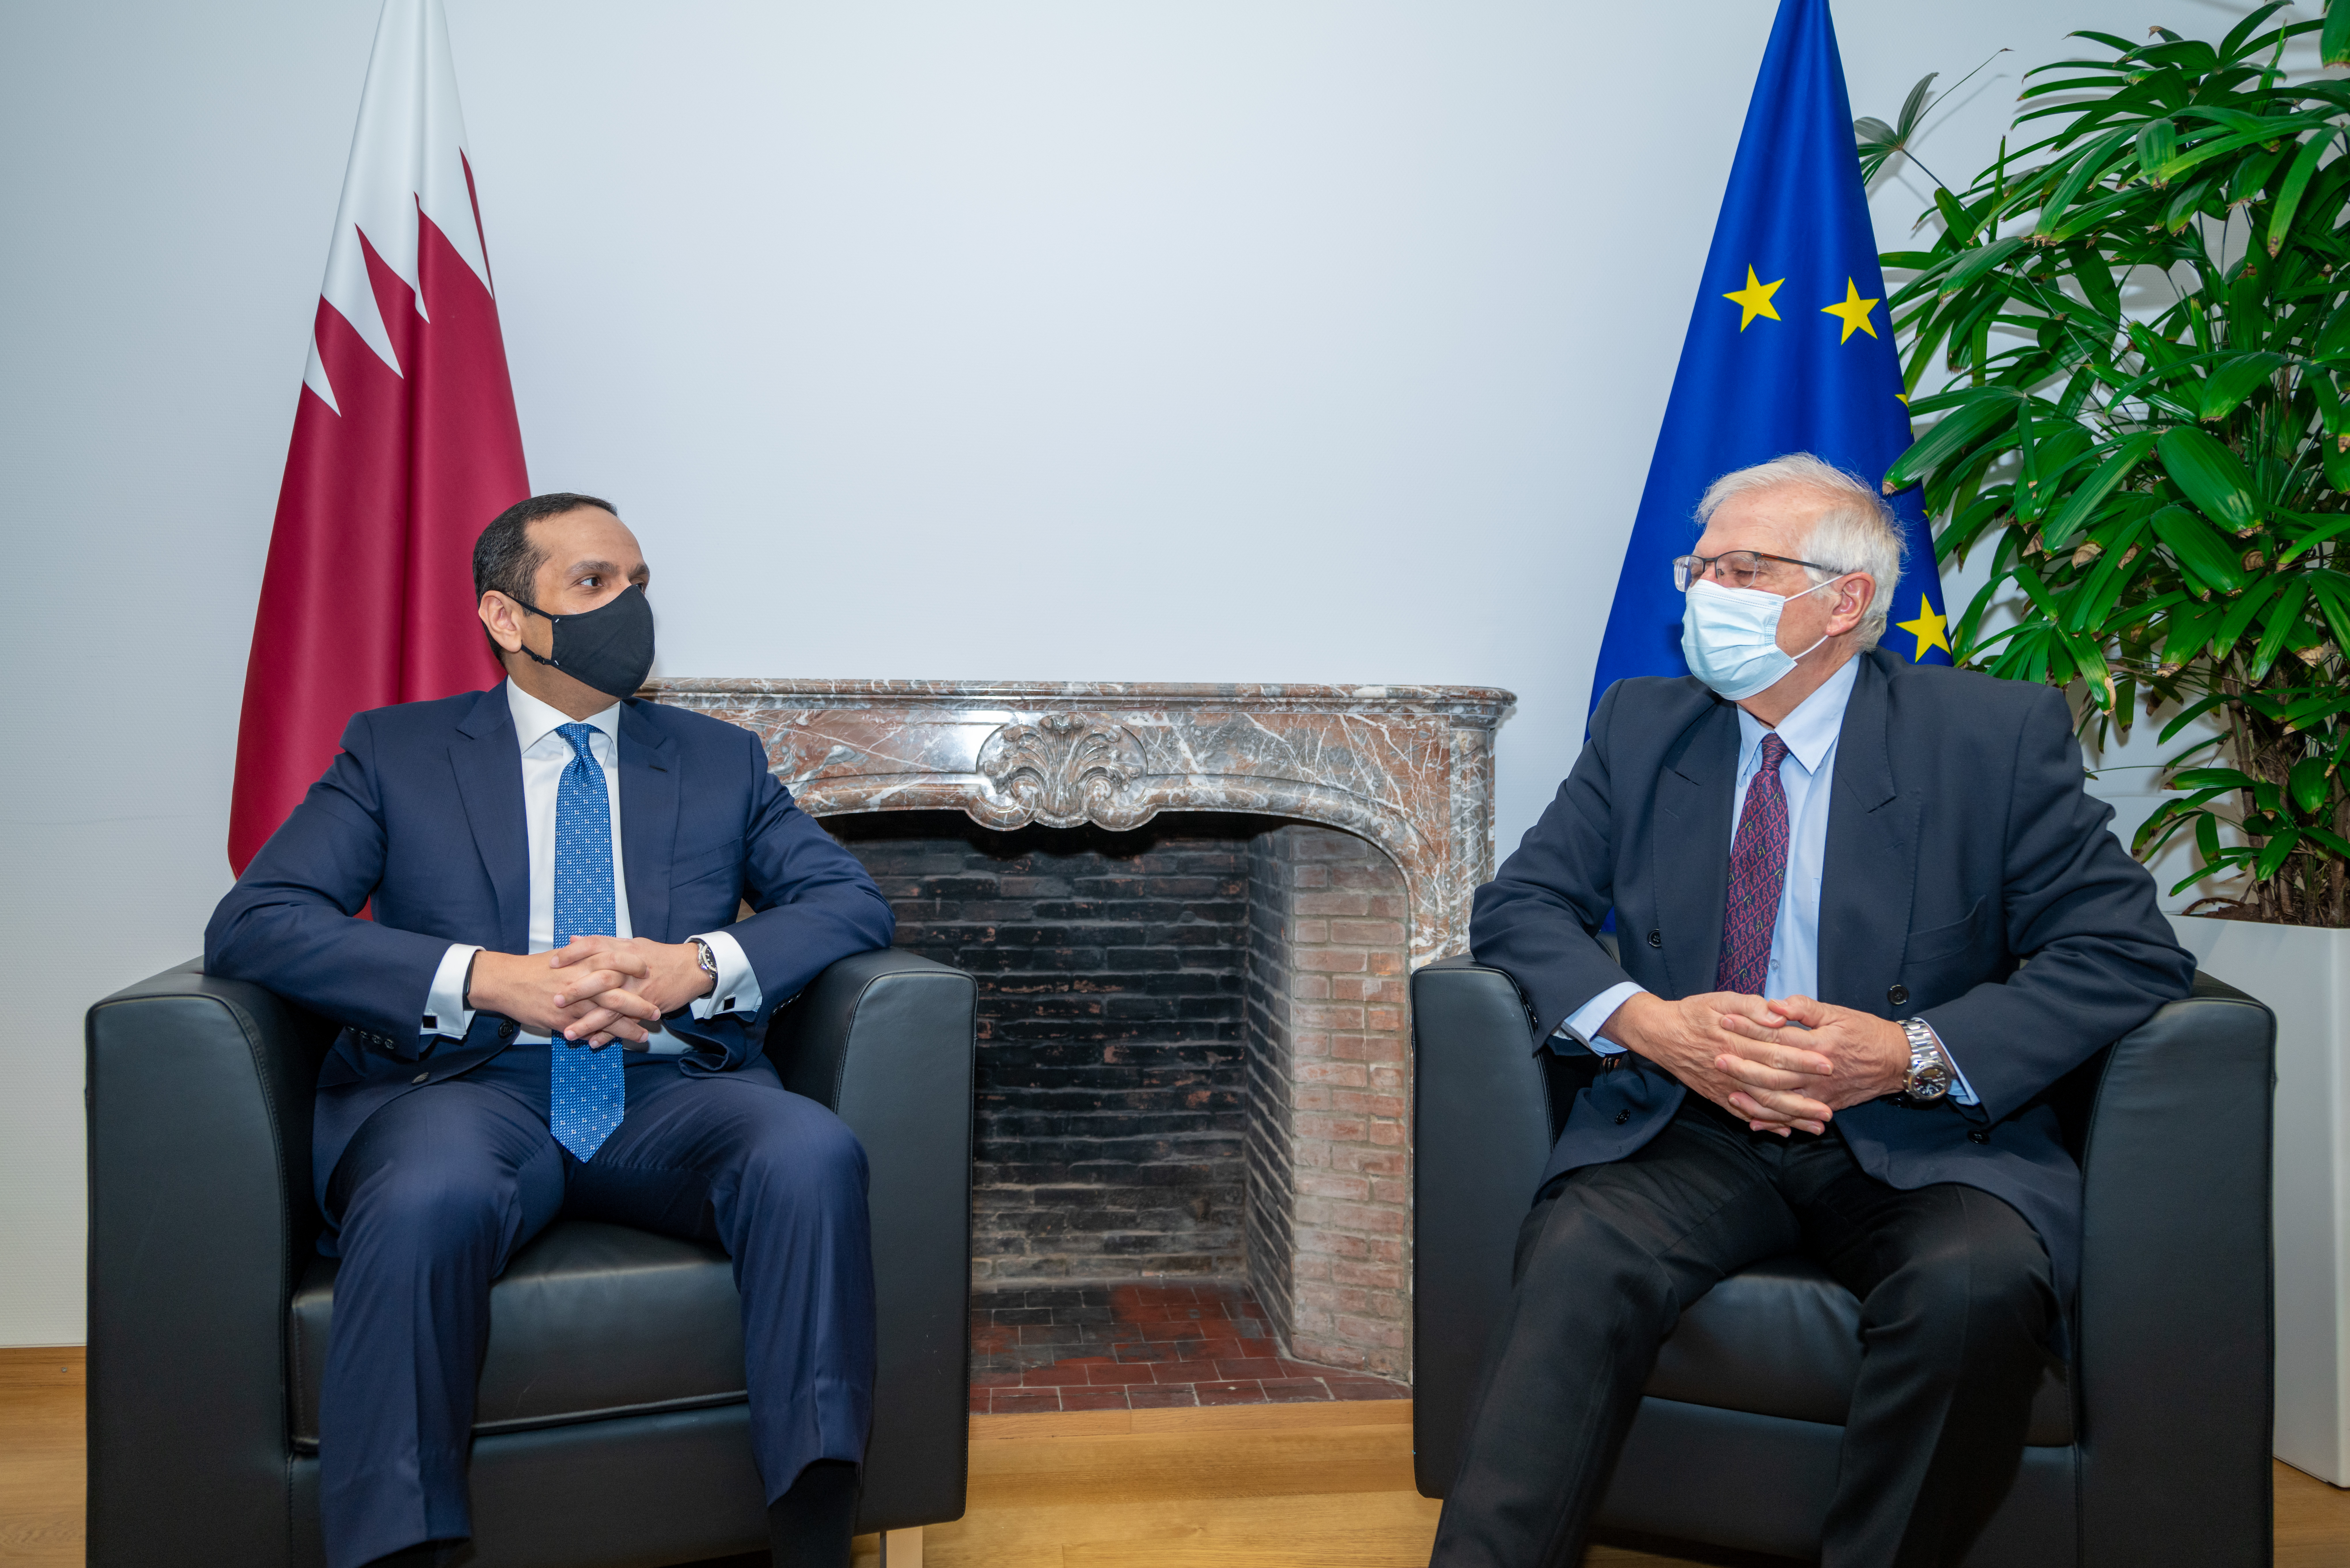 The Deputy Prime Minister and Minister of Foreign Affairs Meets High Representative of EU for Foreign Affairs and Security Policy